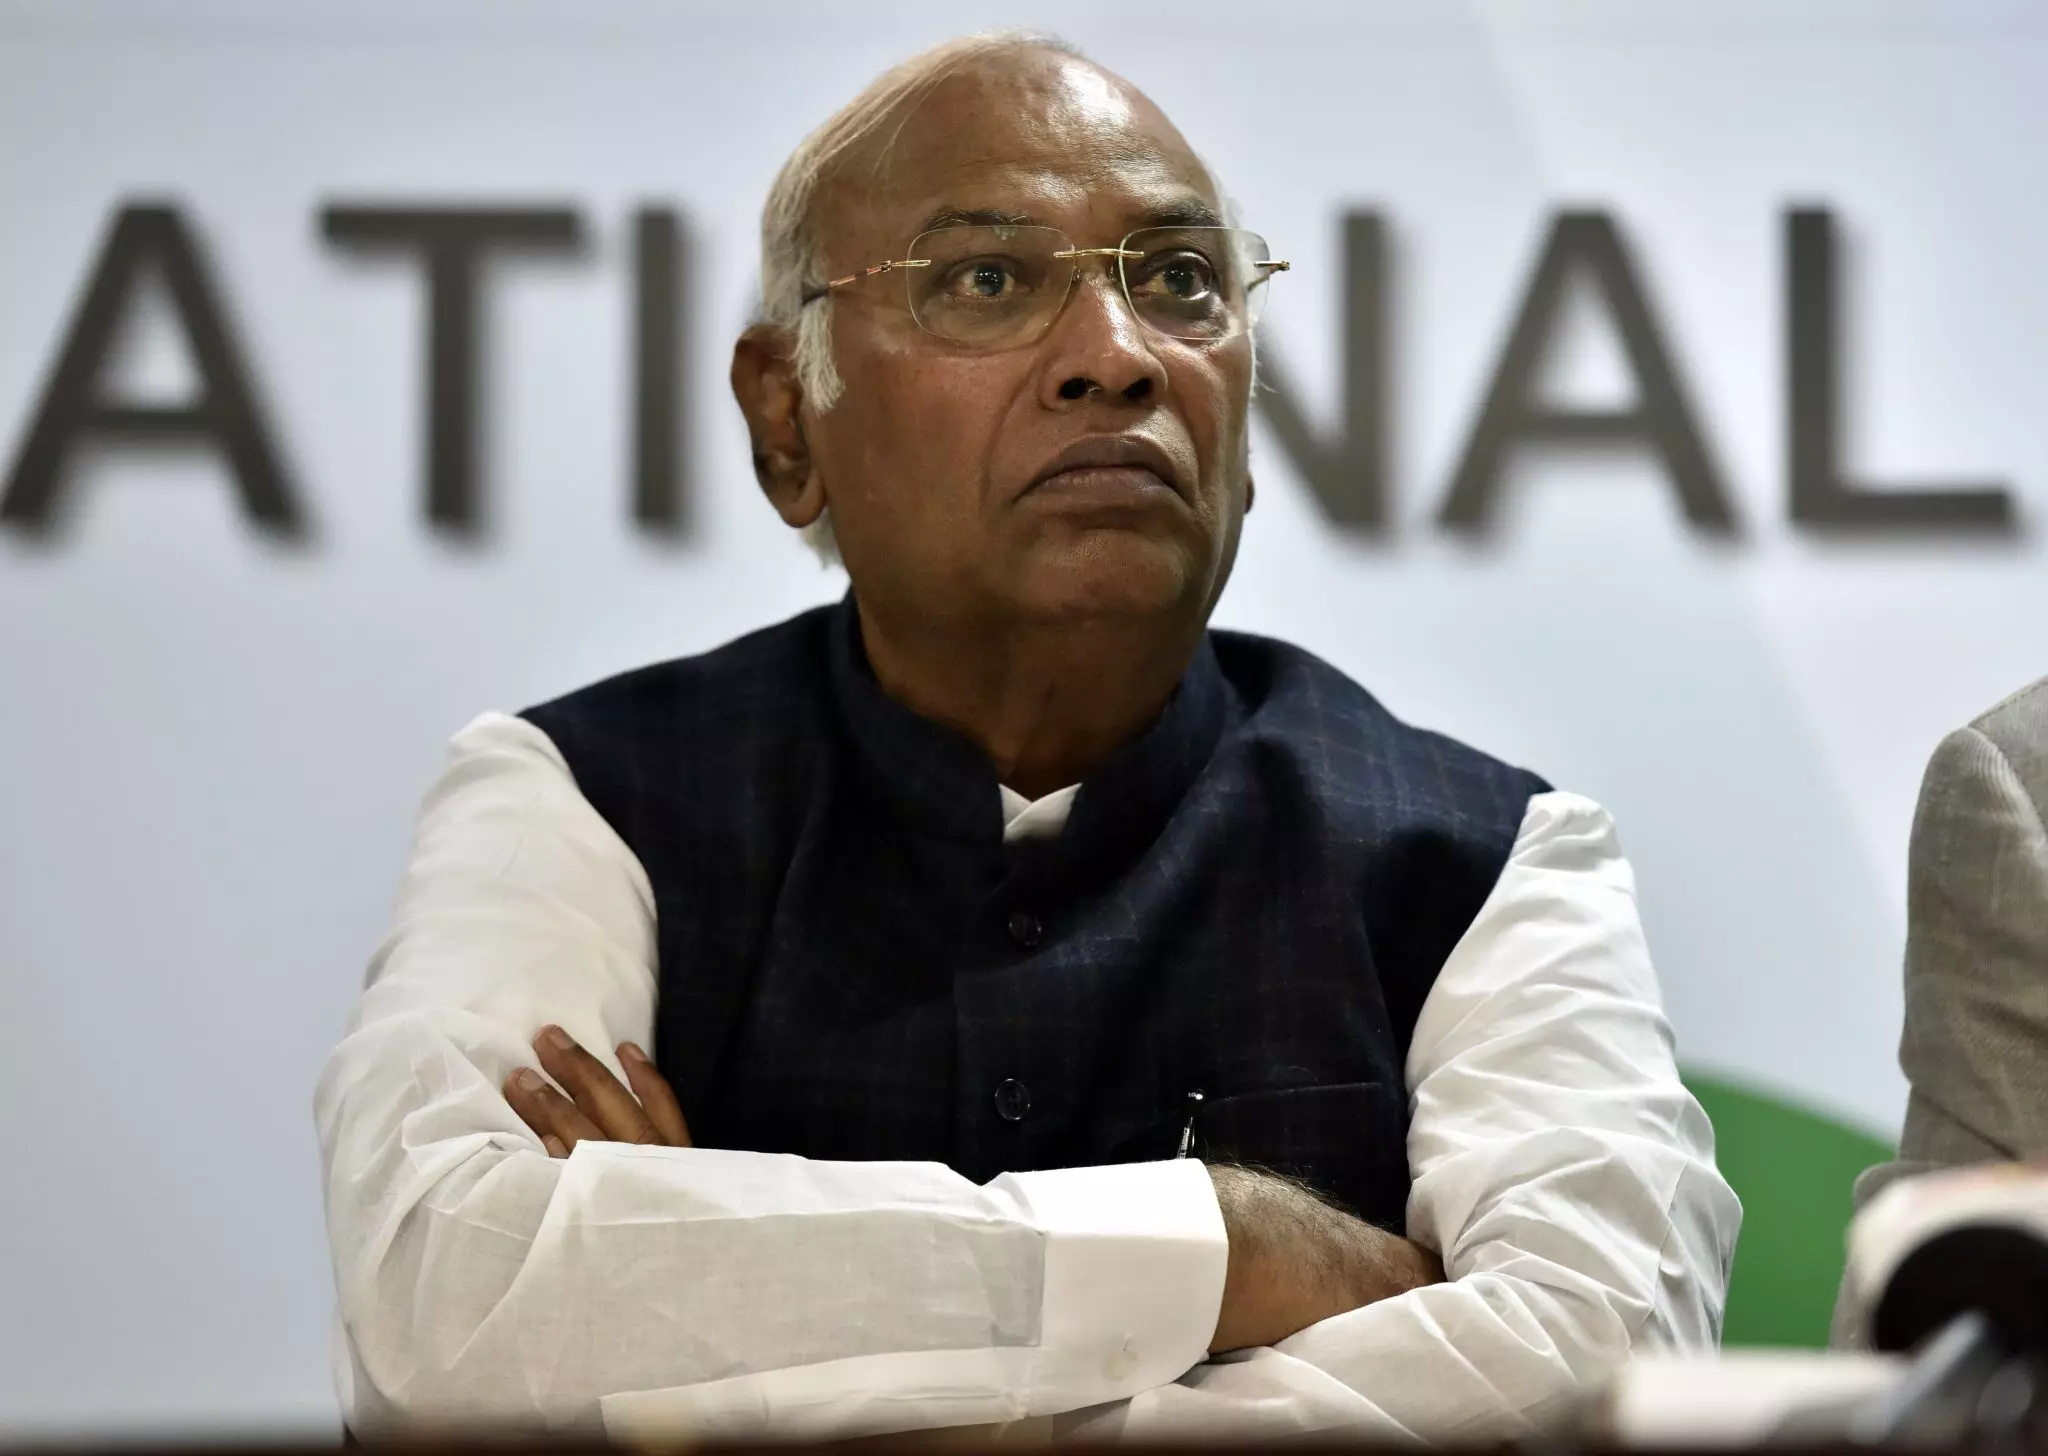 Congress President Mallikarjun Kharge will contest elections from UP eyes on Dalit voters